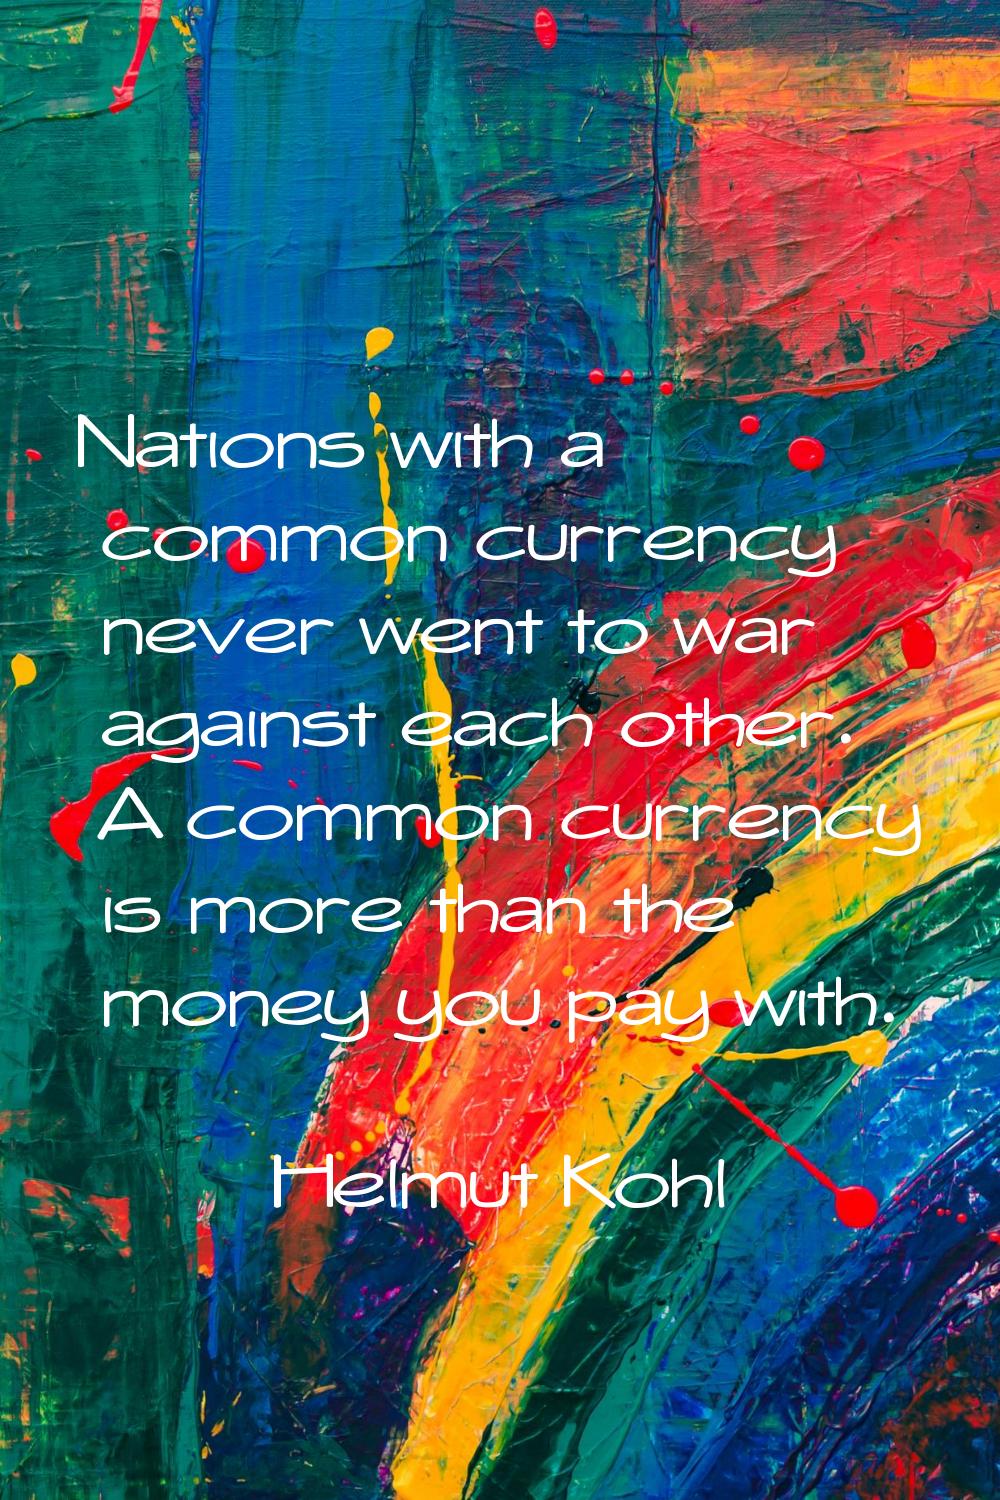 Nations with a common currency never went to war against each other. A common currency is more than